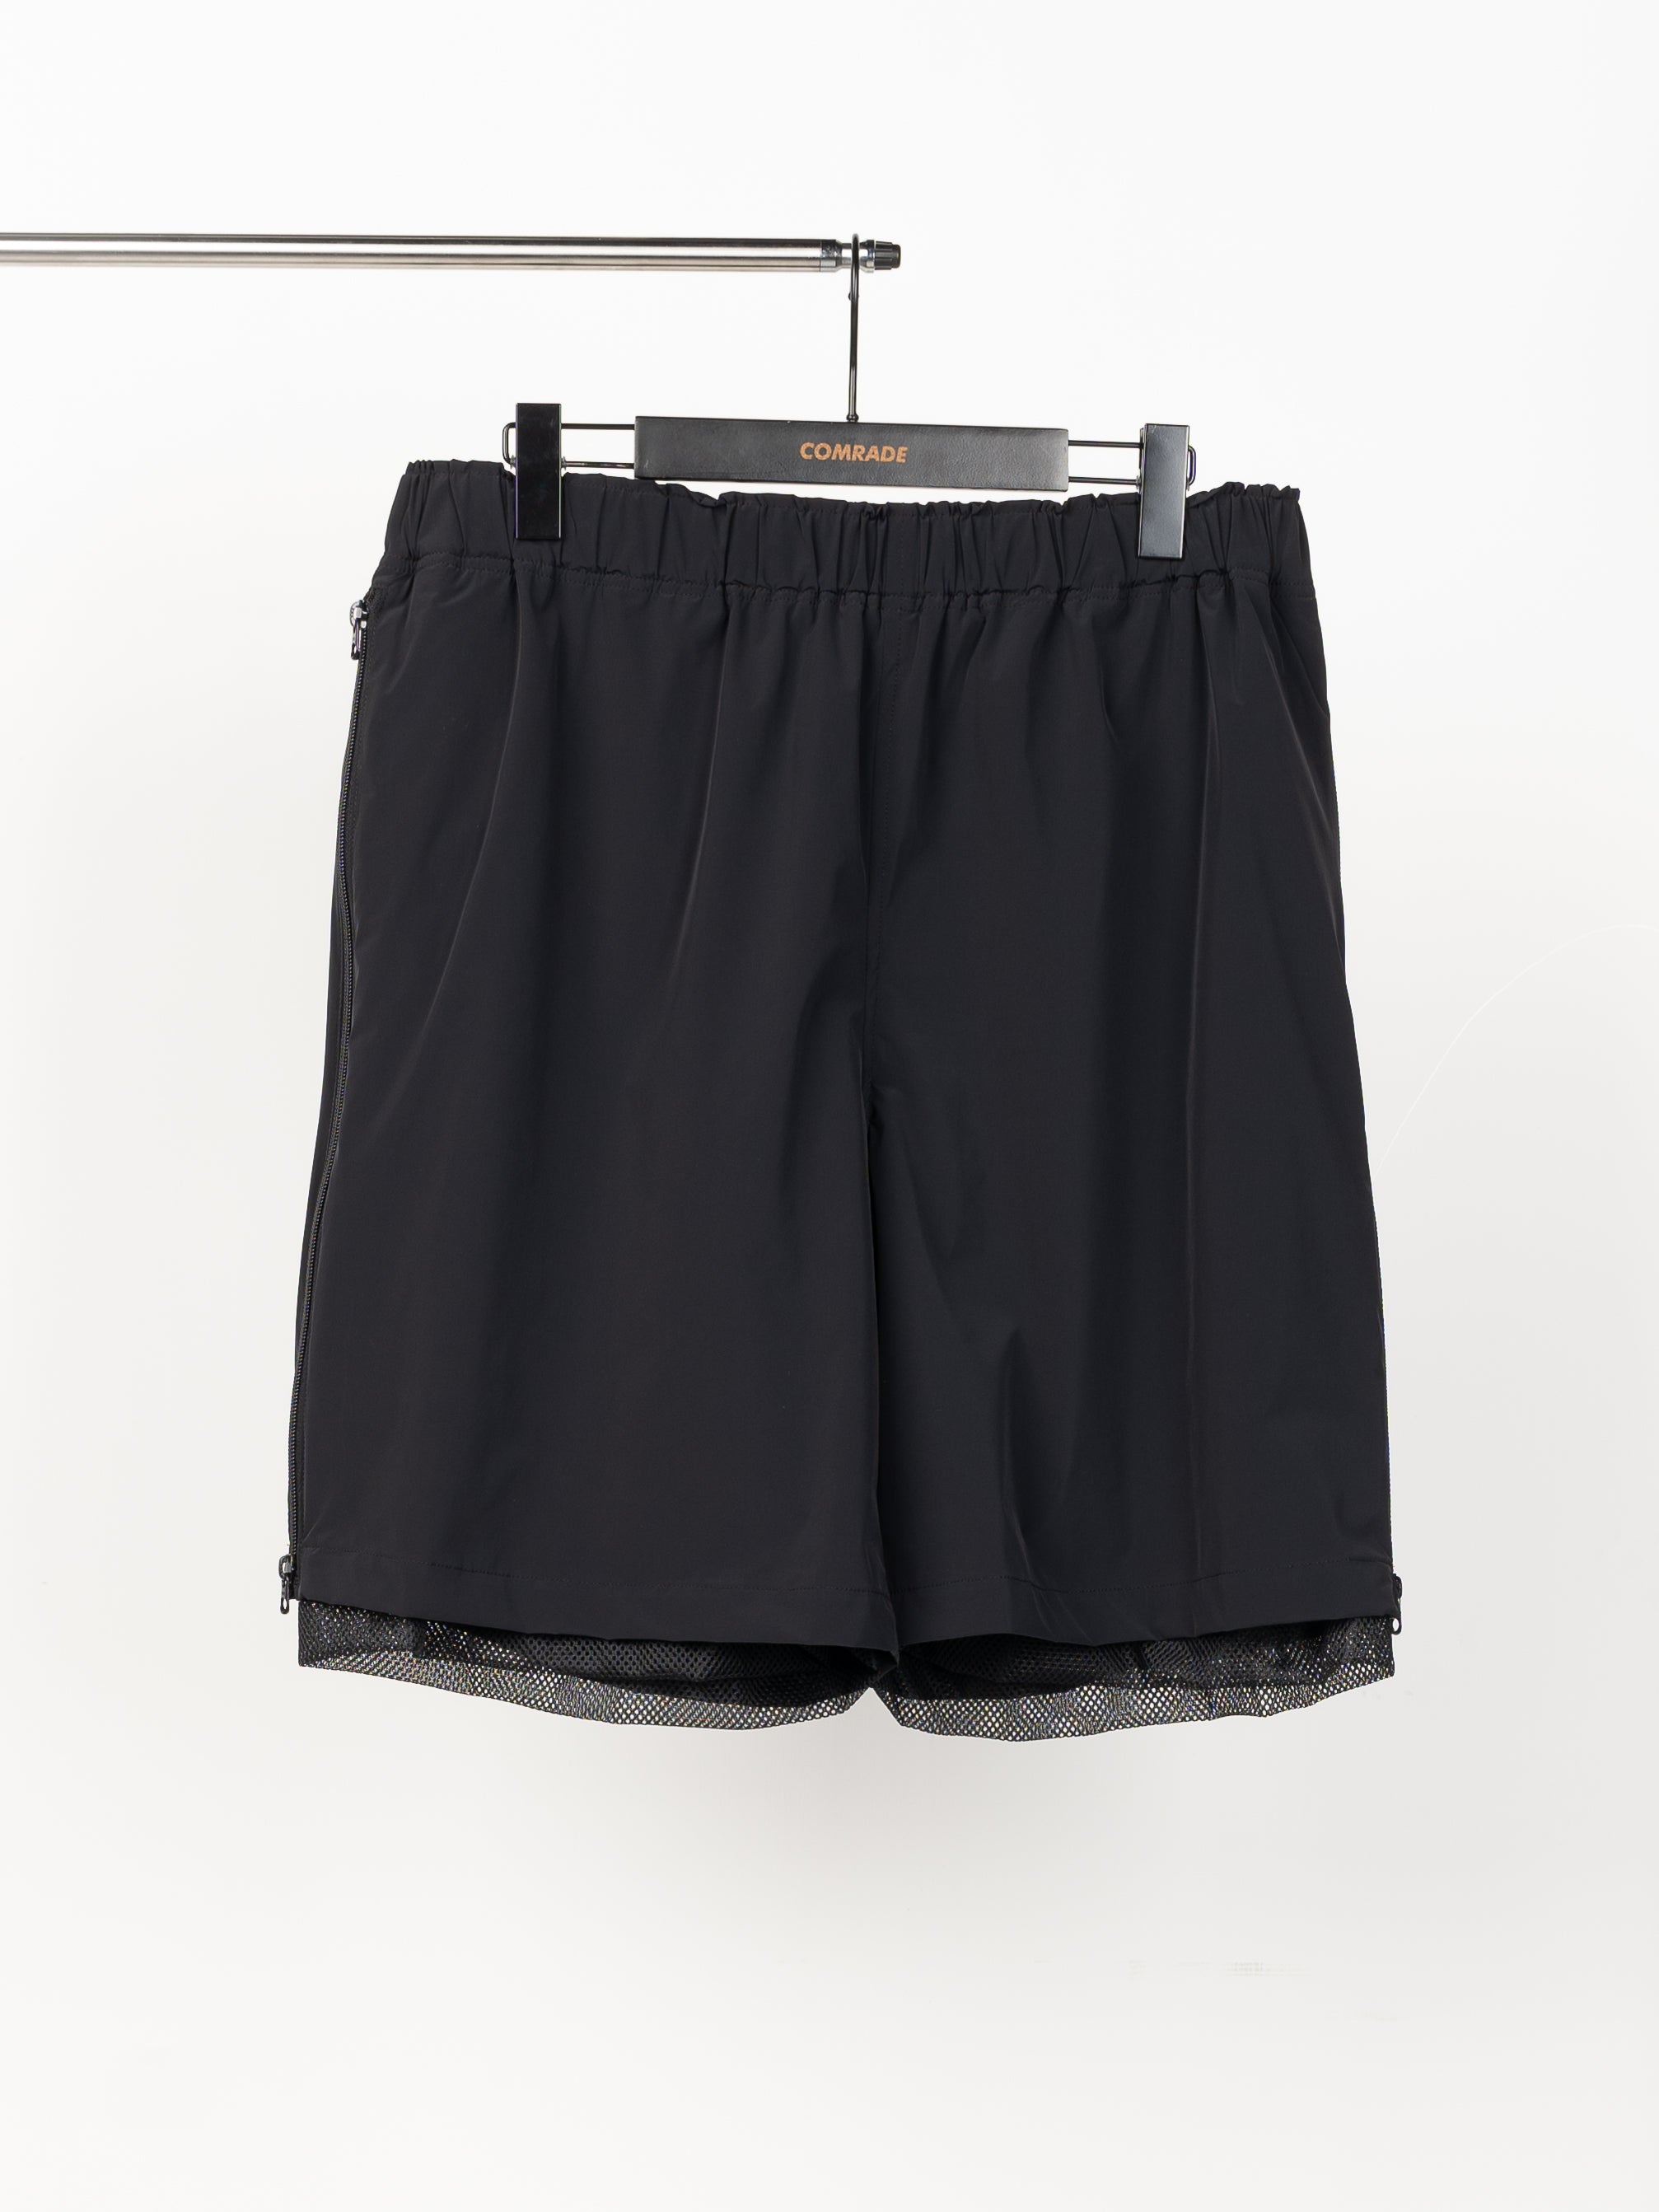 is-ness Techical Ventilation Shorts (Black)